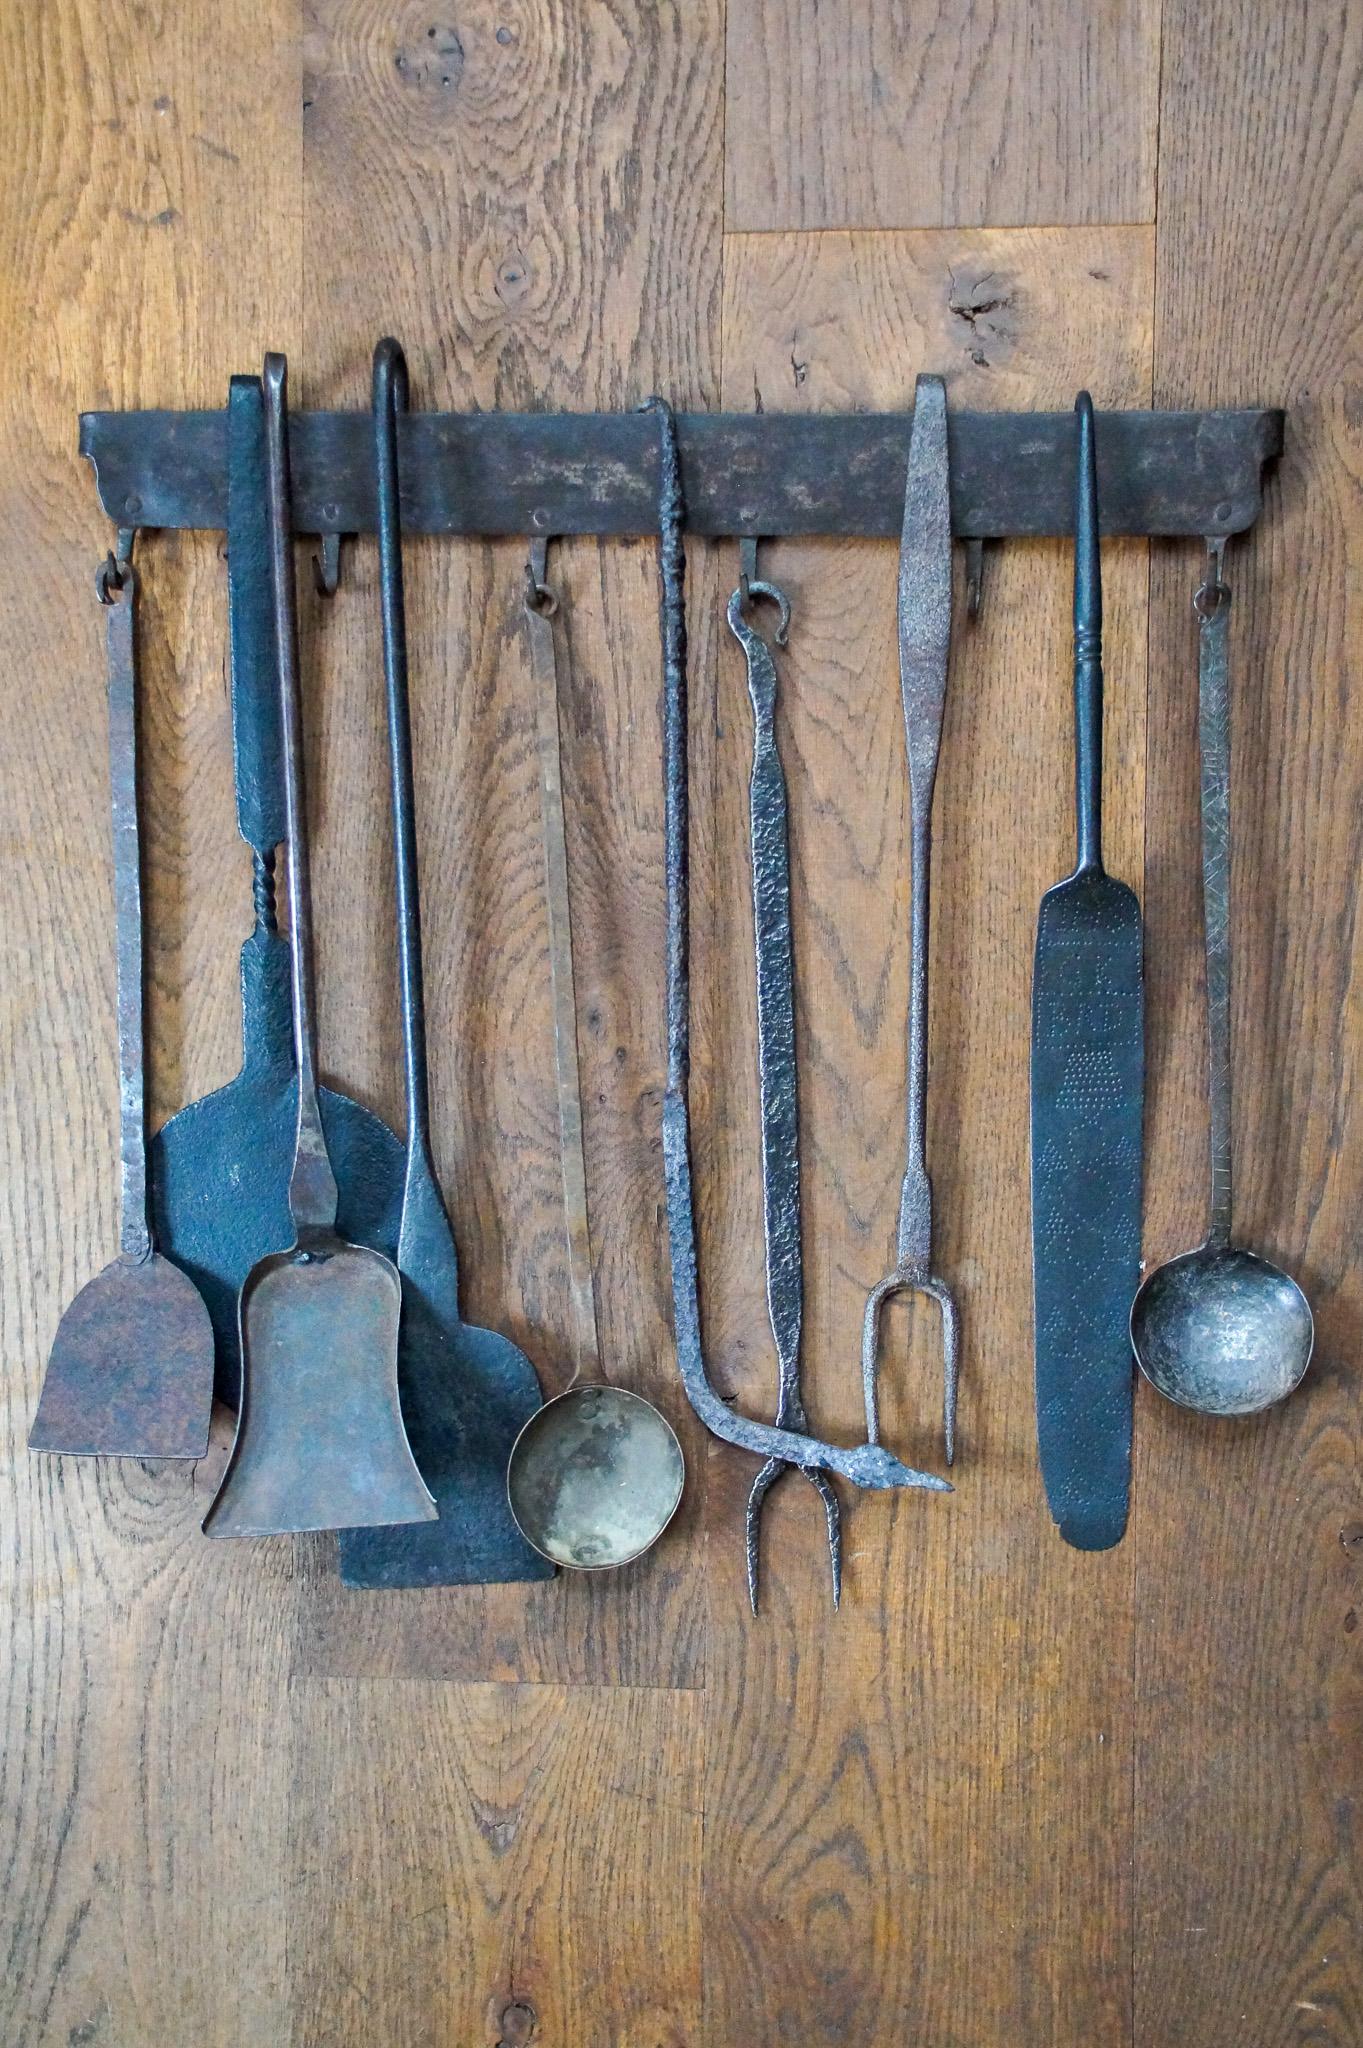 18th - 19th century Dutch Louis XV fireplace tool set consisting of two tasting forks, a poke, several shovels, a decorated spatula, several spoons (of which one is decorated) and a hanger. The set is also made of wrought iron. They are in a good